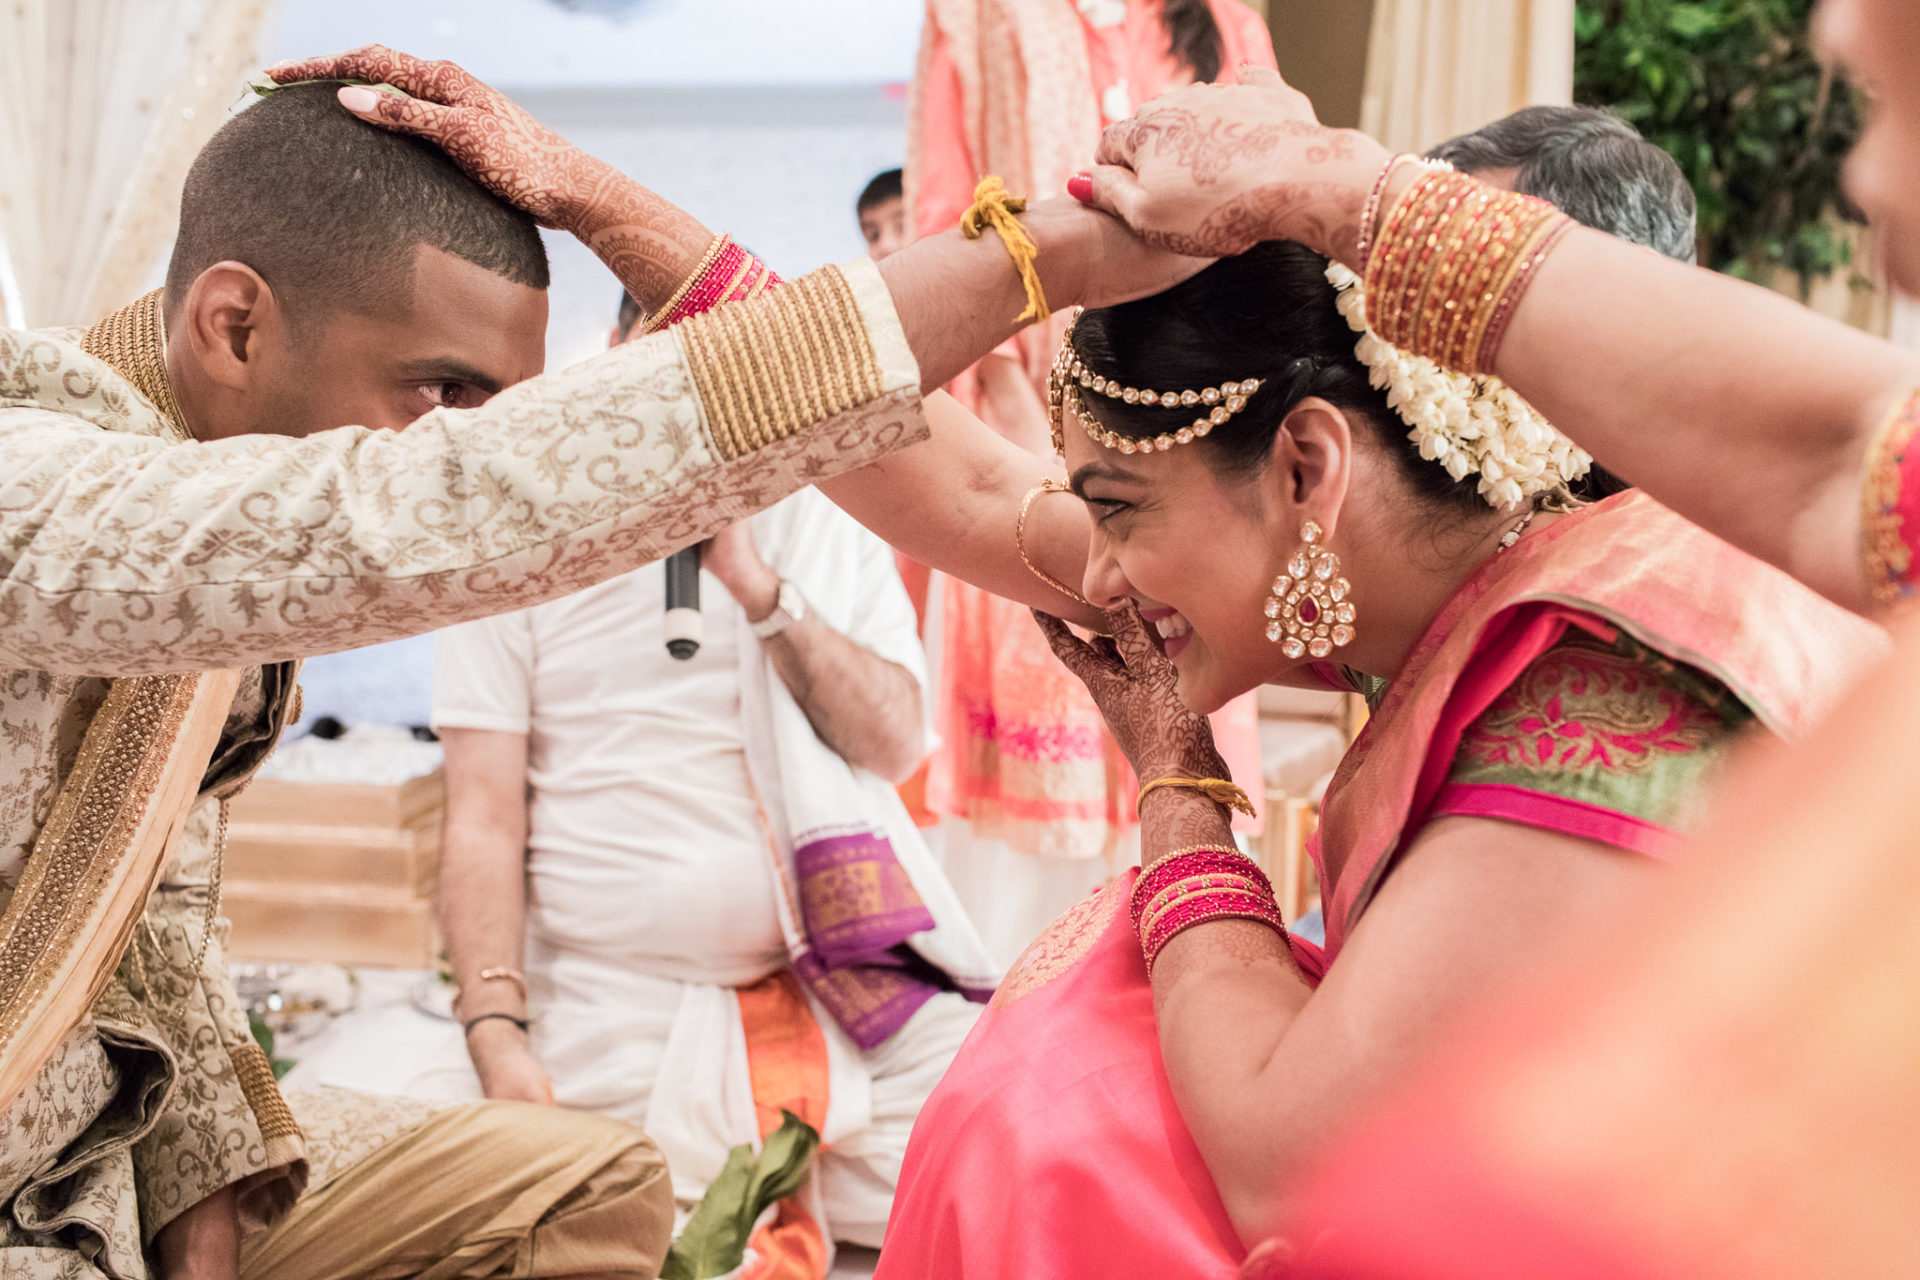 a woman with mendhi rests her hand on the grooms hand, which lays on the bride's head. the bride rests her hand on the grooms head, smiling, wearing a bright pink sari.